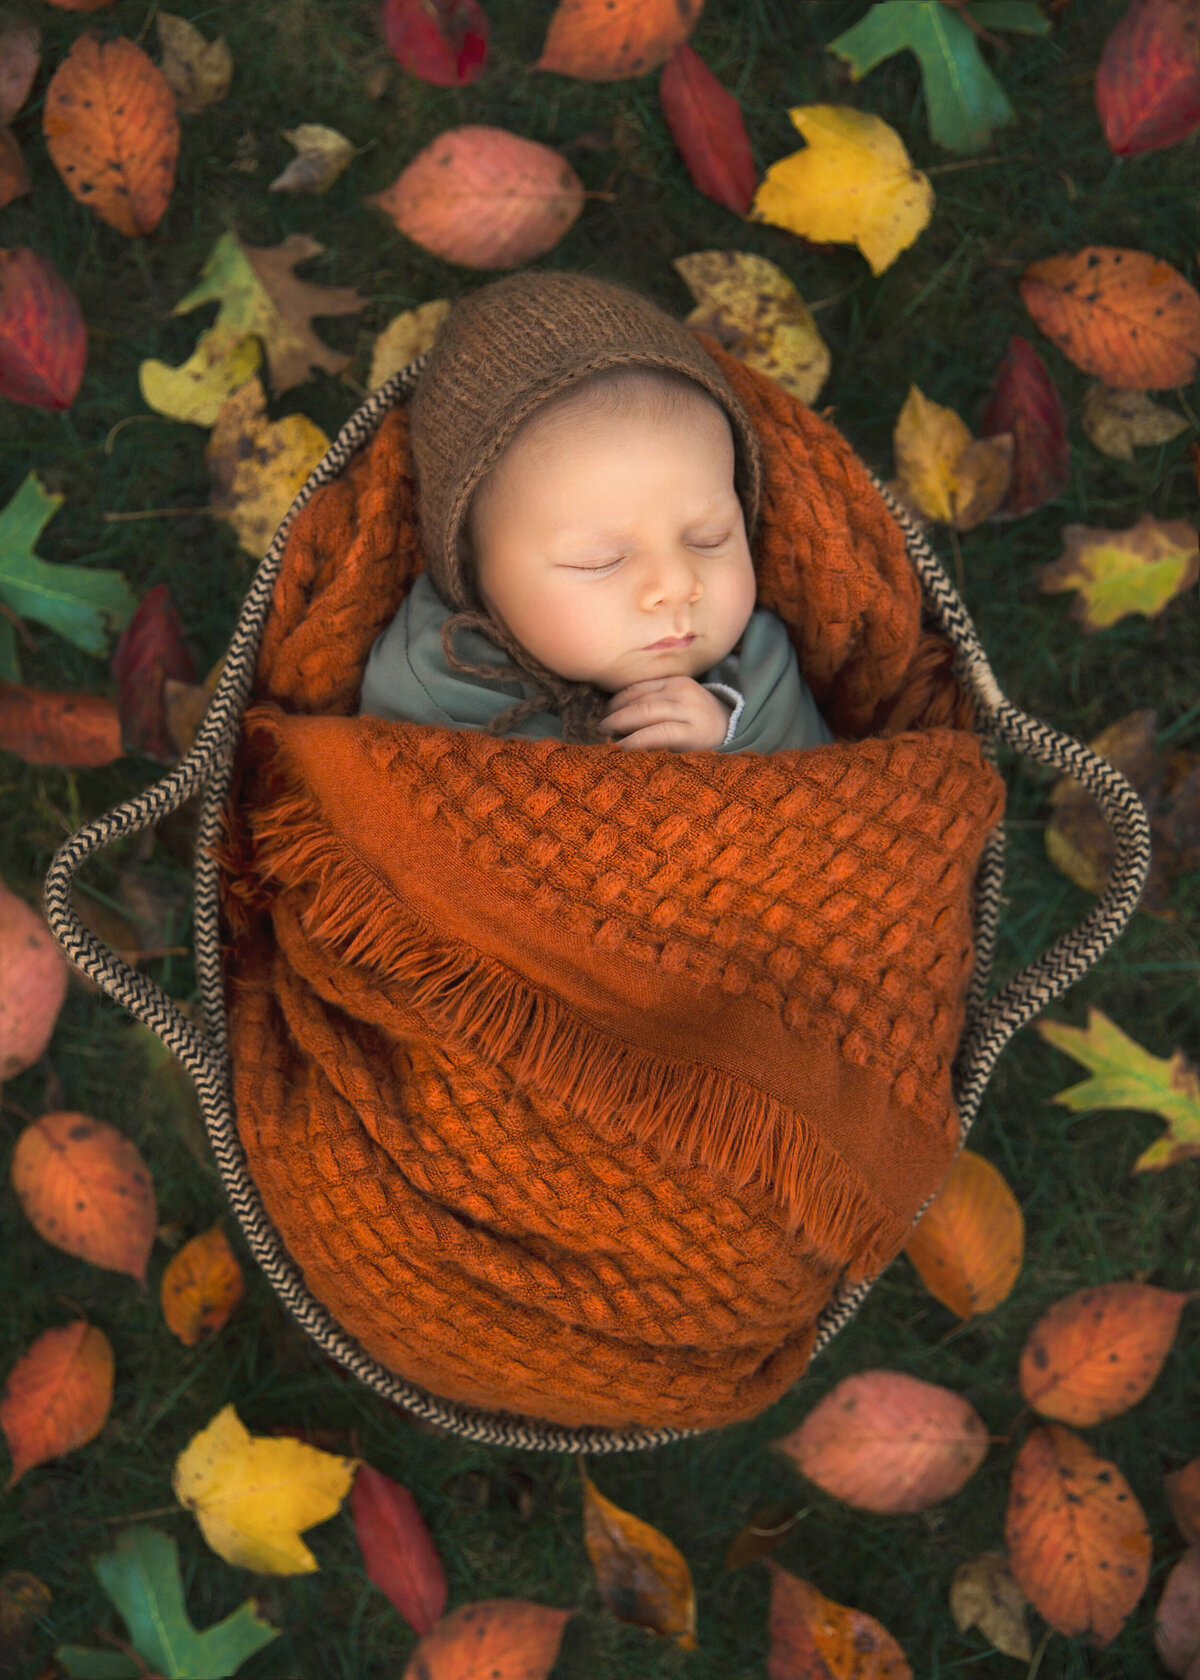 Newborn sleeps for photos, outside during the fall season taken by NJ baby photographer